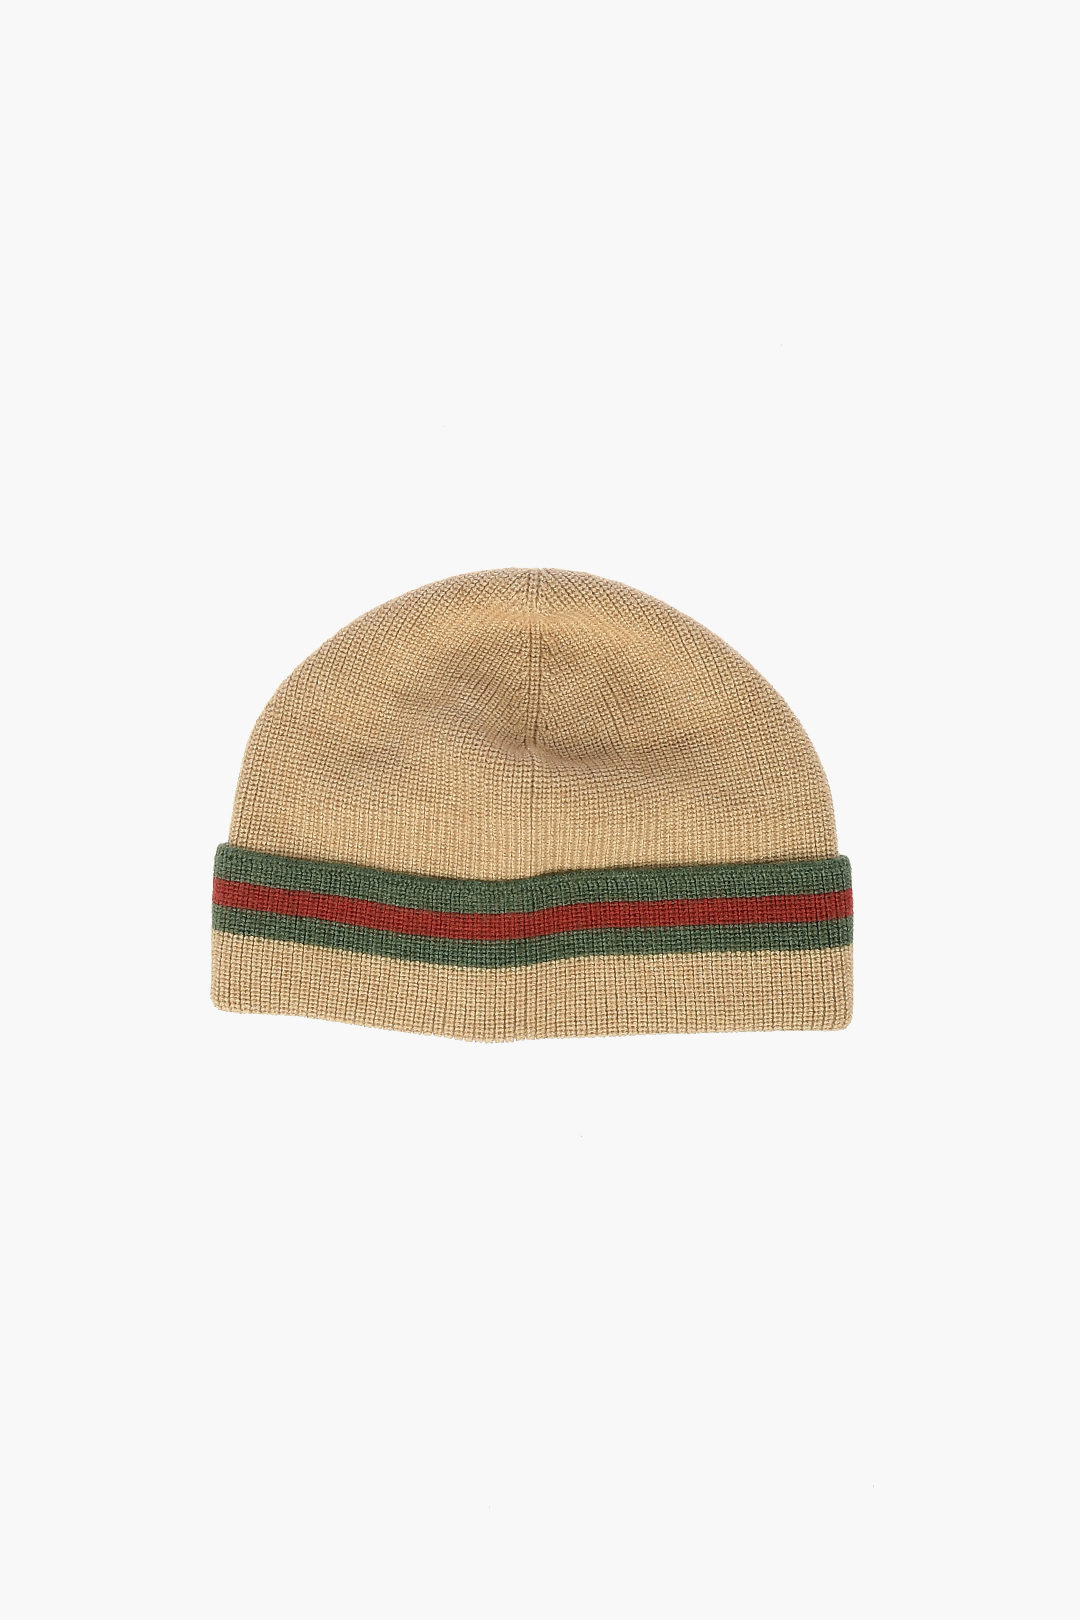 Gucci Silk and Cashmere Beanie Hat men - Glamood Outlet